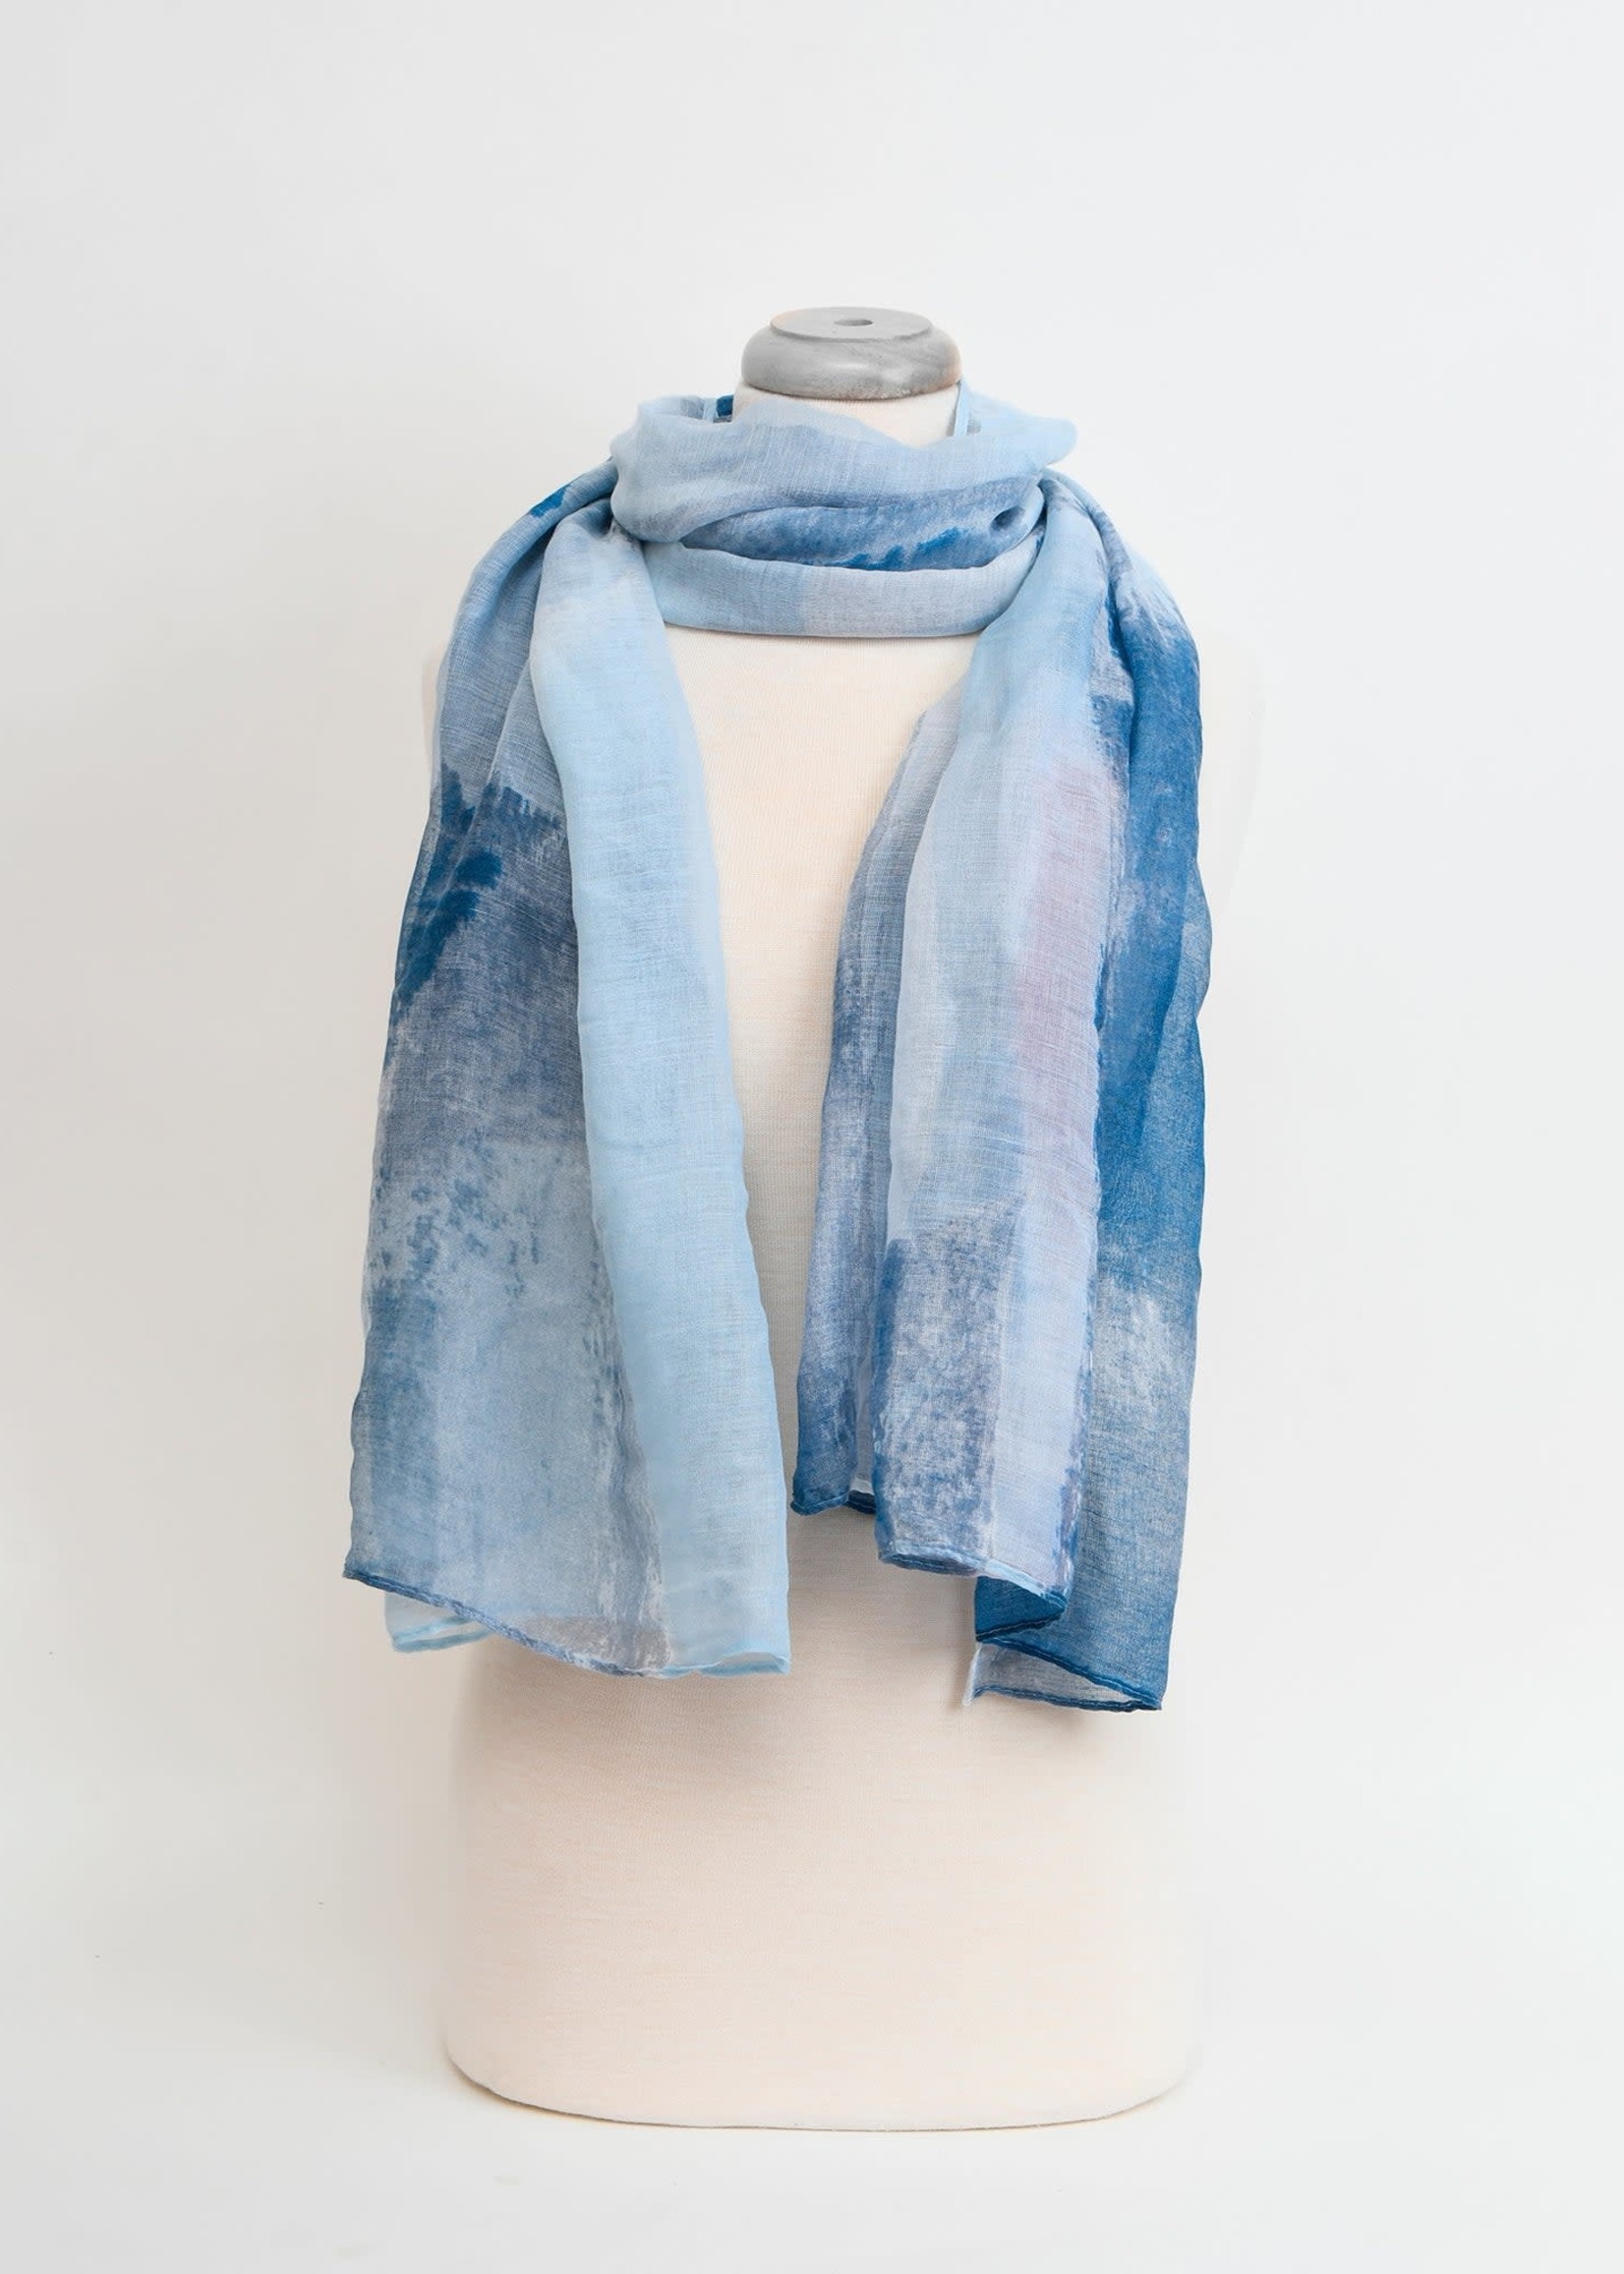 Caracol Caracol Lightweight Abstract Printed Scarf Blue 6153-BLU